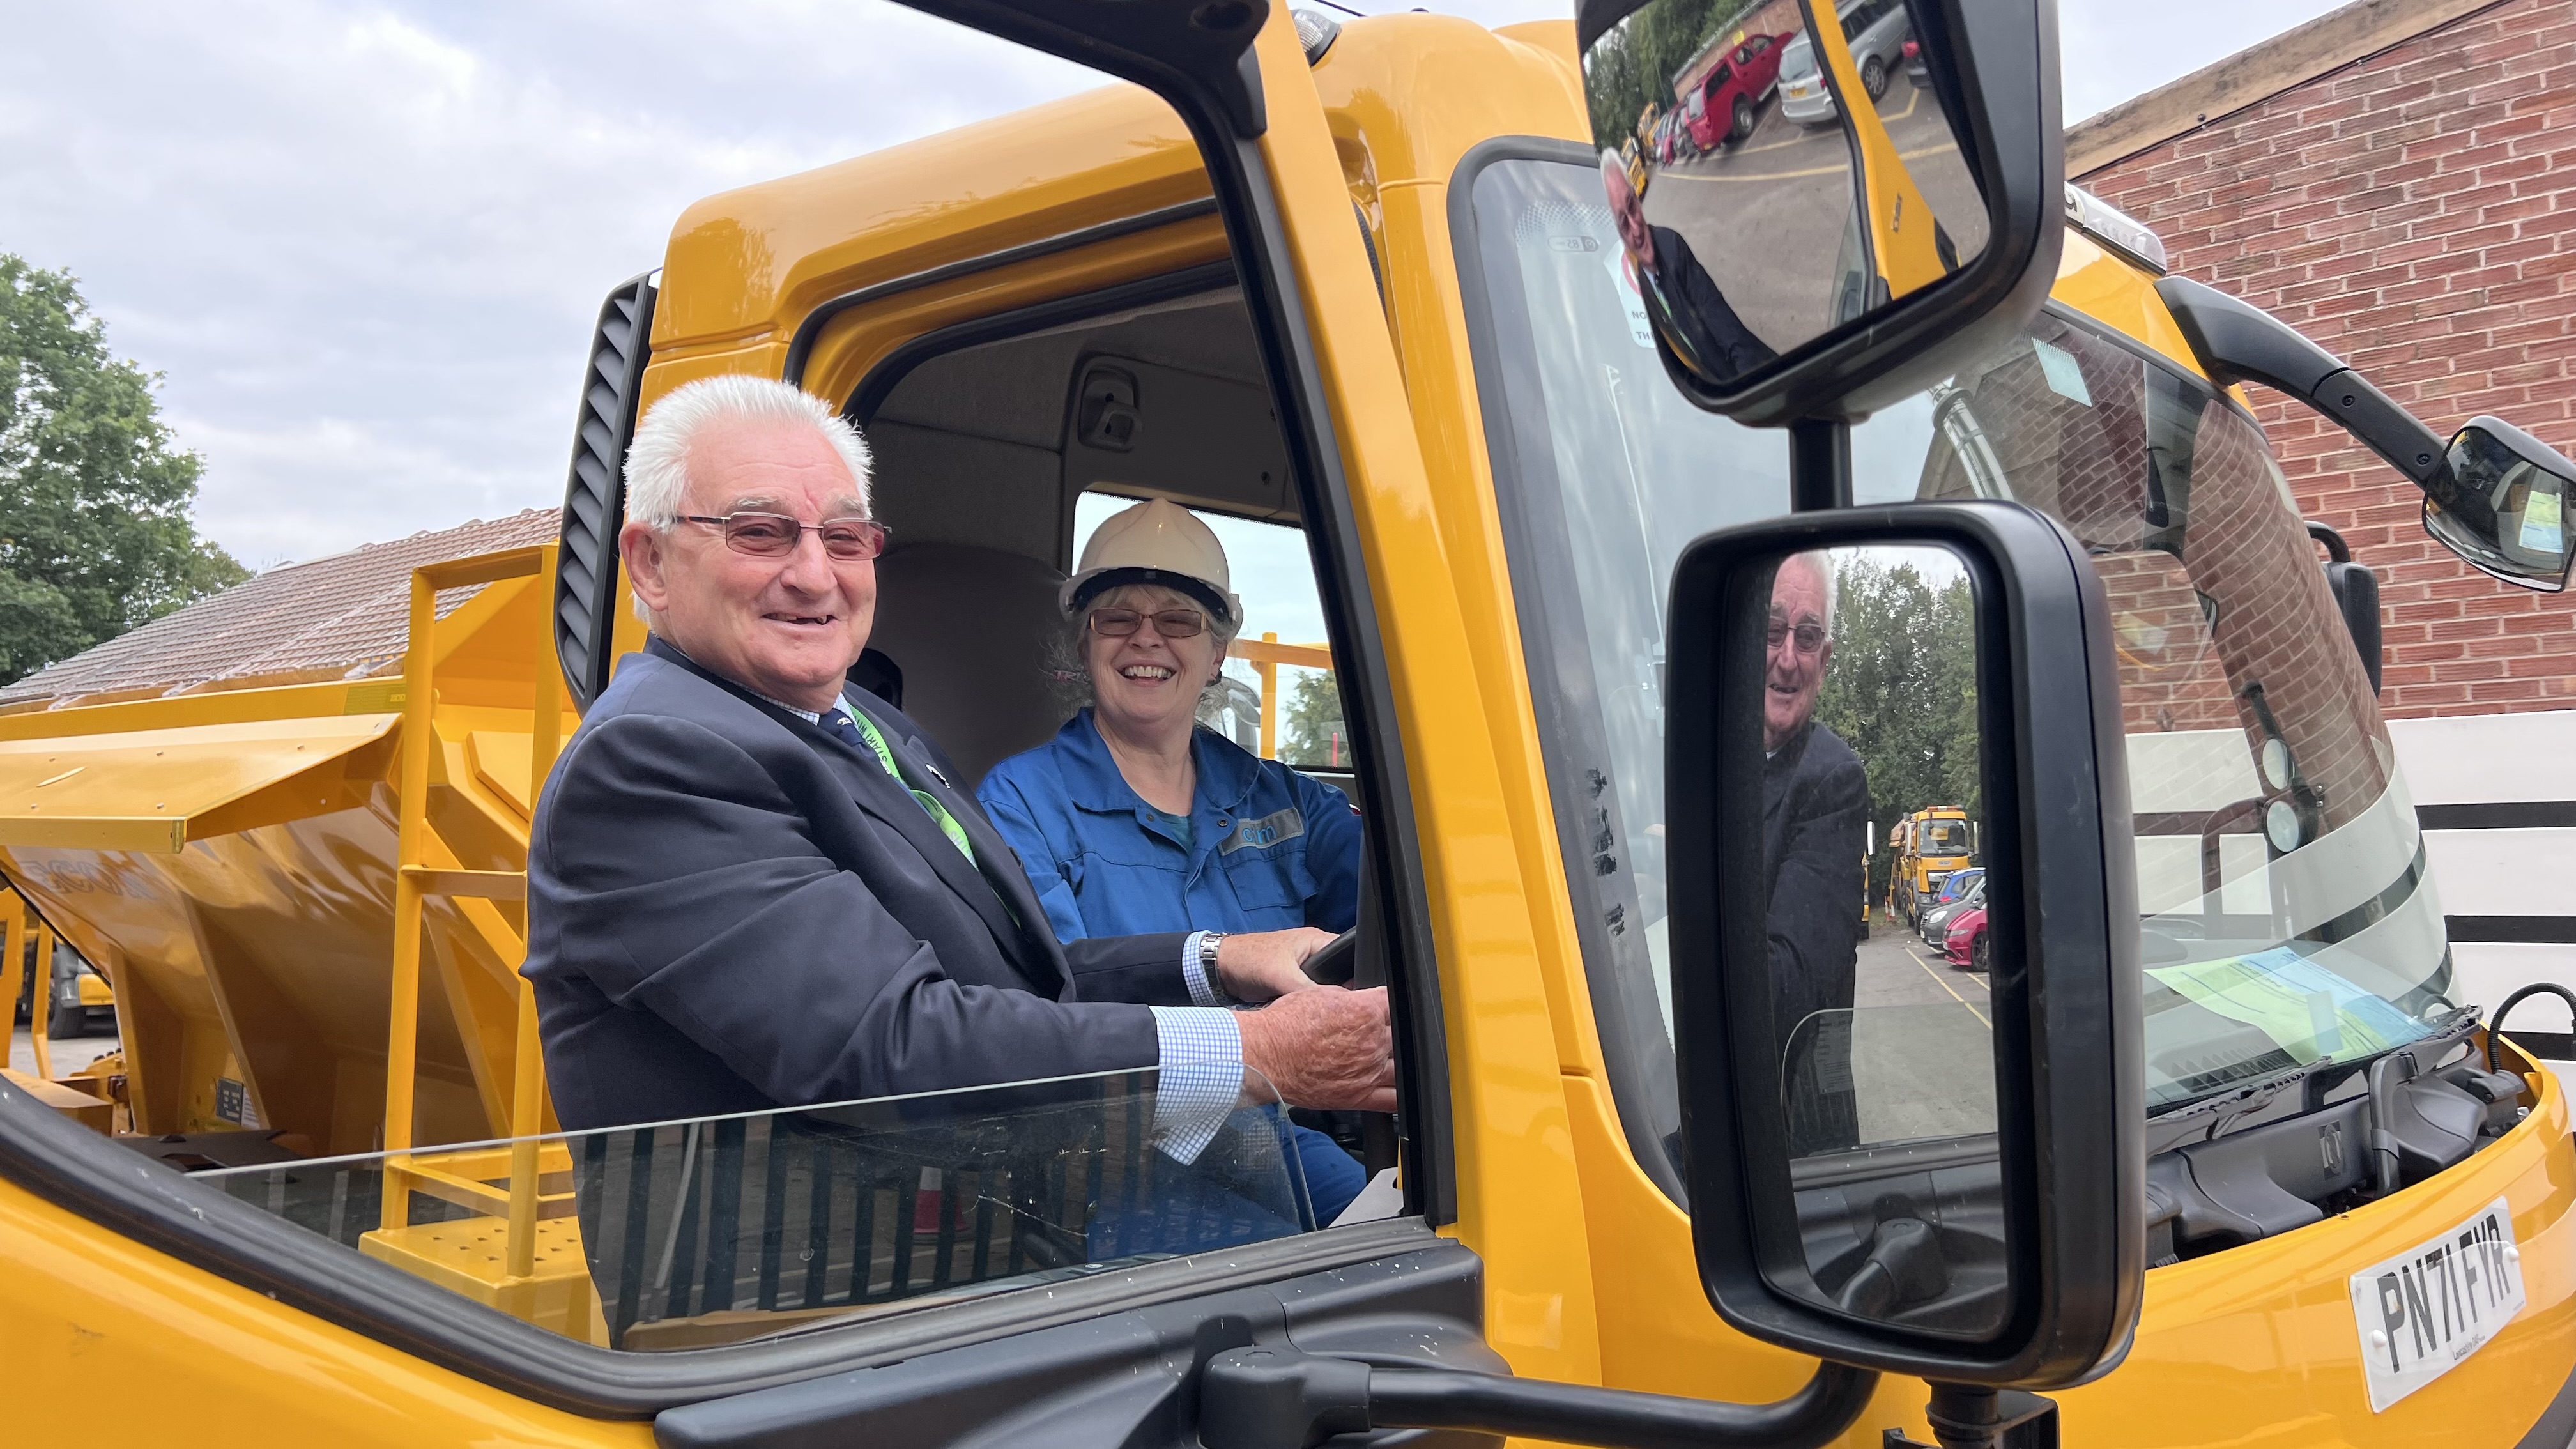 Cllr Wallace Redford, Warwickshire County Council Portfolio Holder for Transport and Highways  joins Maxine Turnbull, a member of Warwickshire County Council's Fleet Maintenance Service Team.